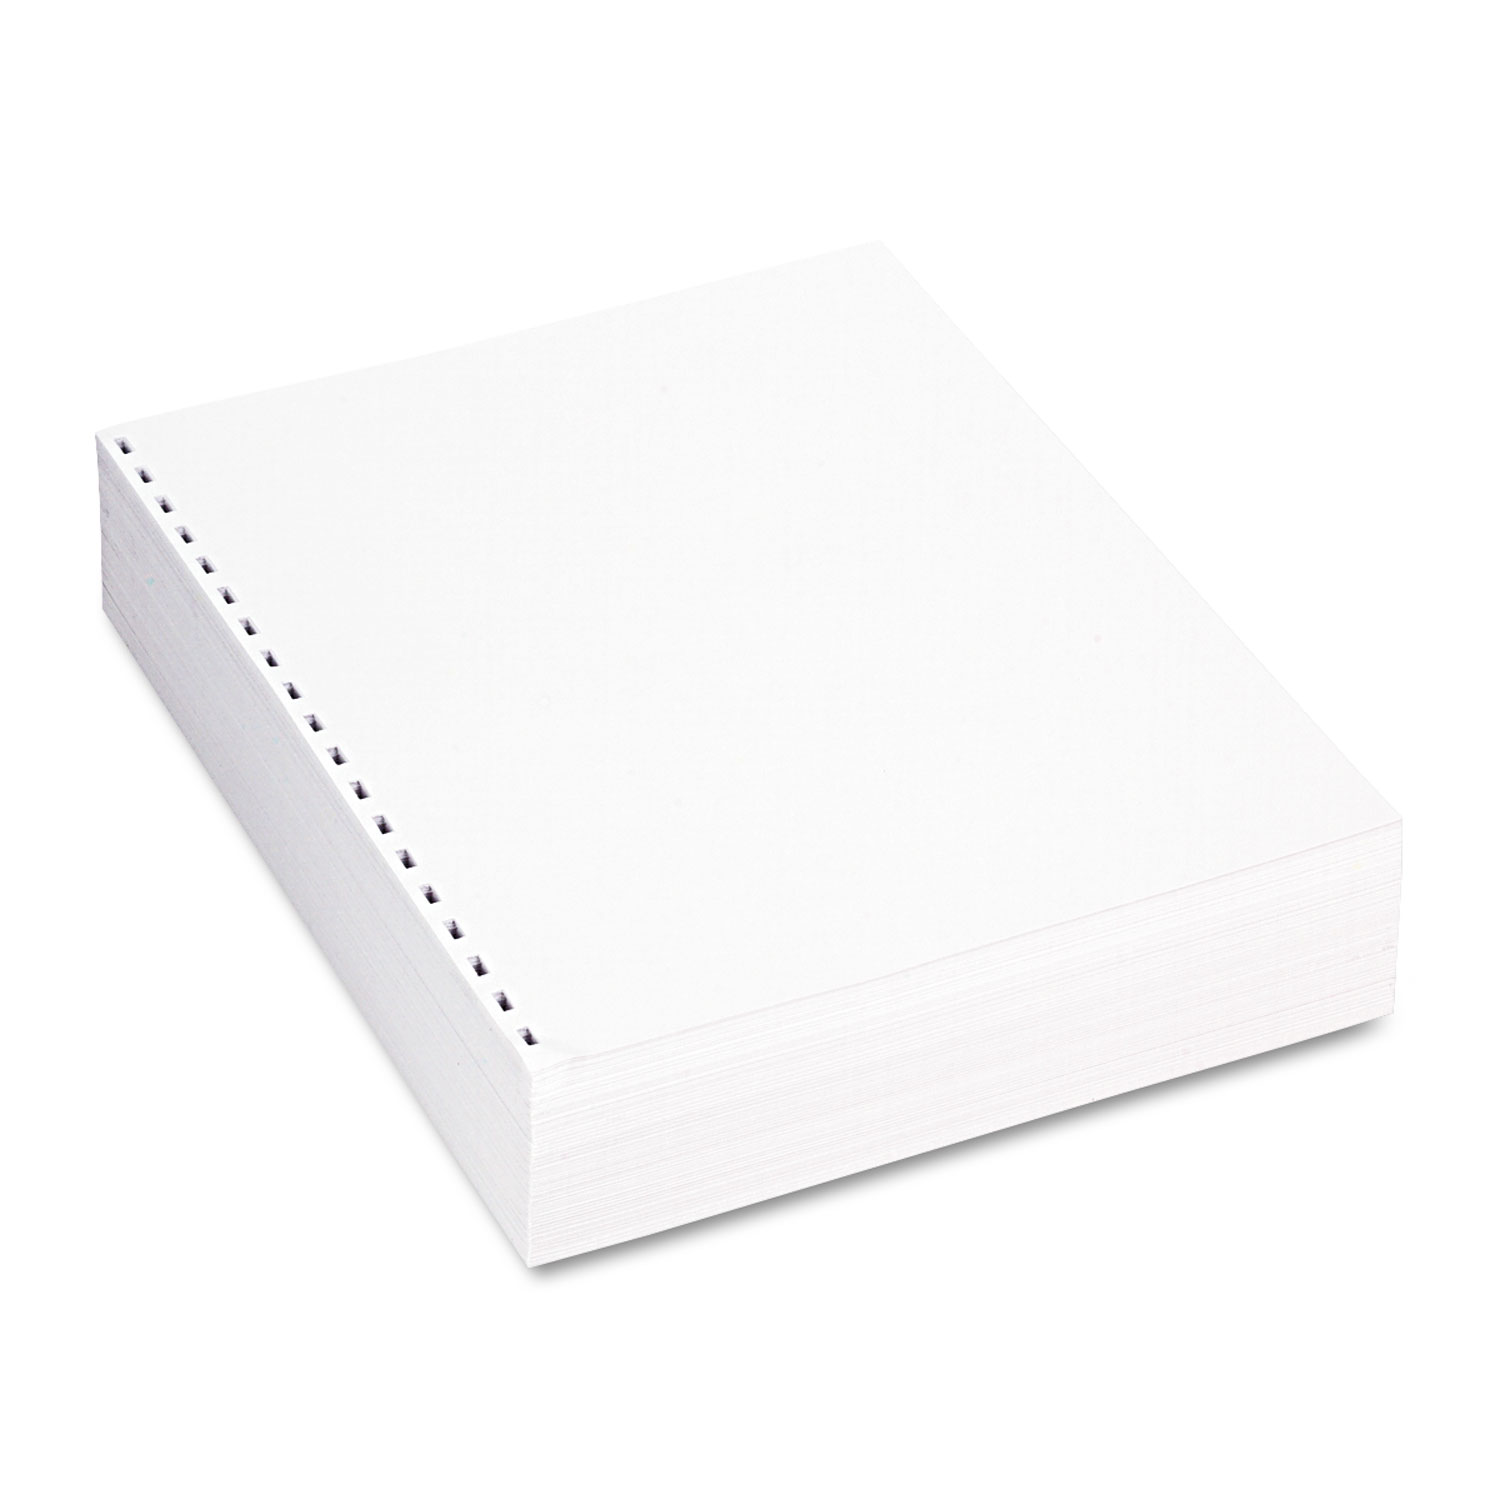 Professional Office Paper, GBC 19-Hole Left Punched, White, Letter, 20lb, 500/RM